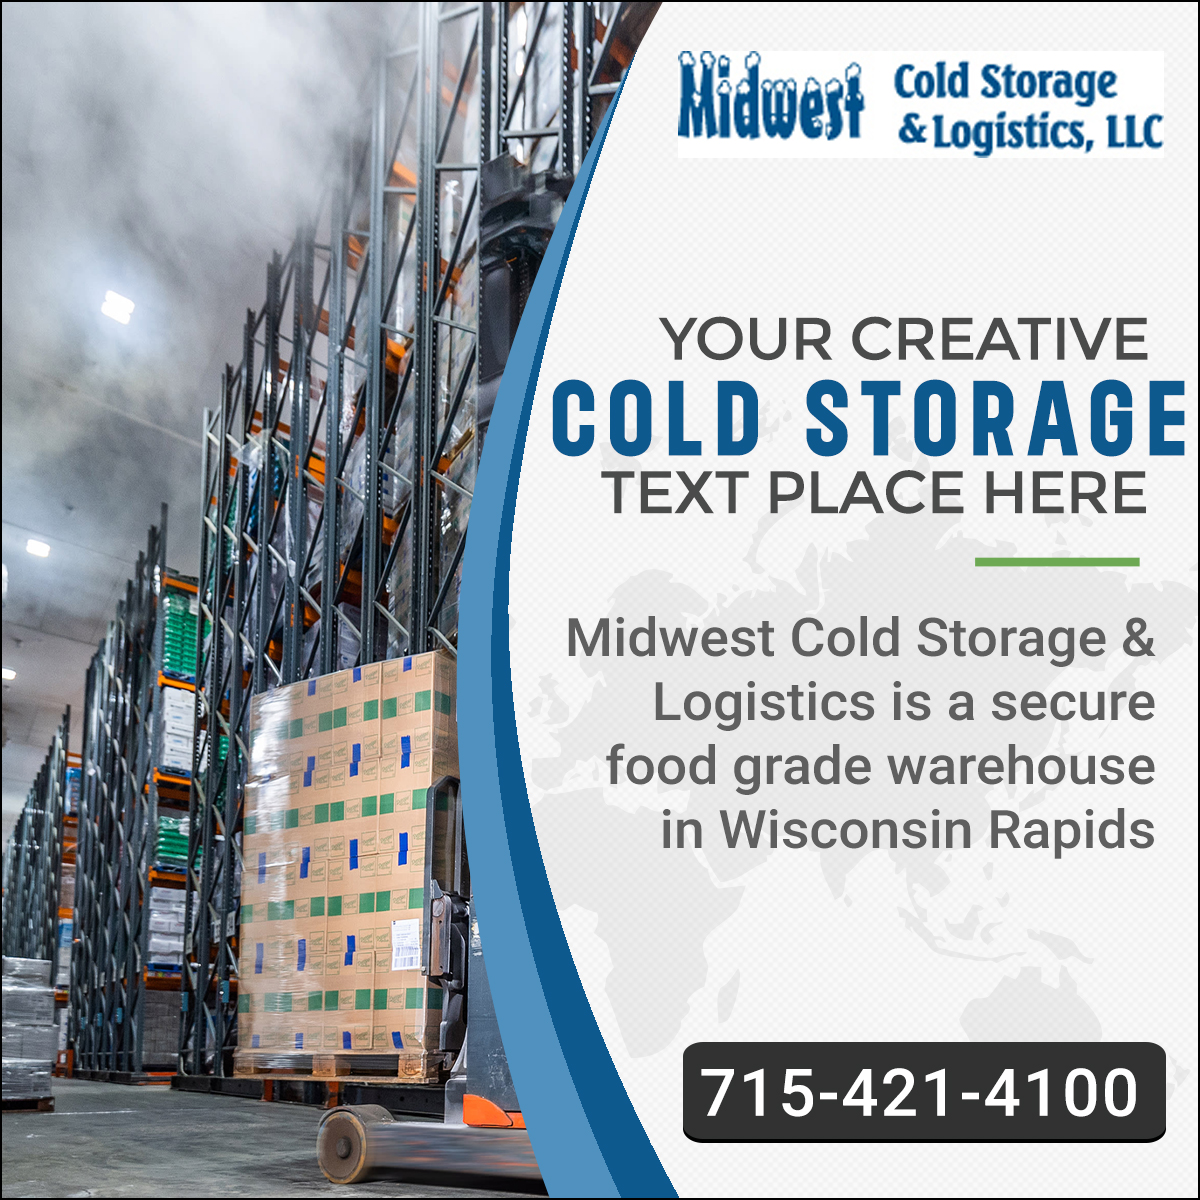 Midwest Cold Storage and Logistics